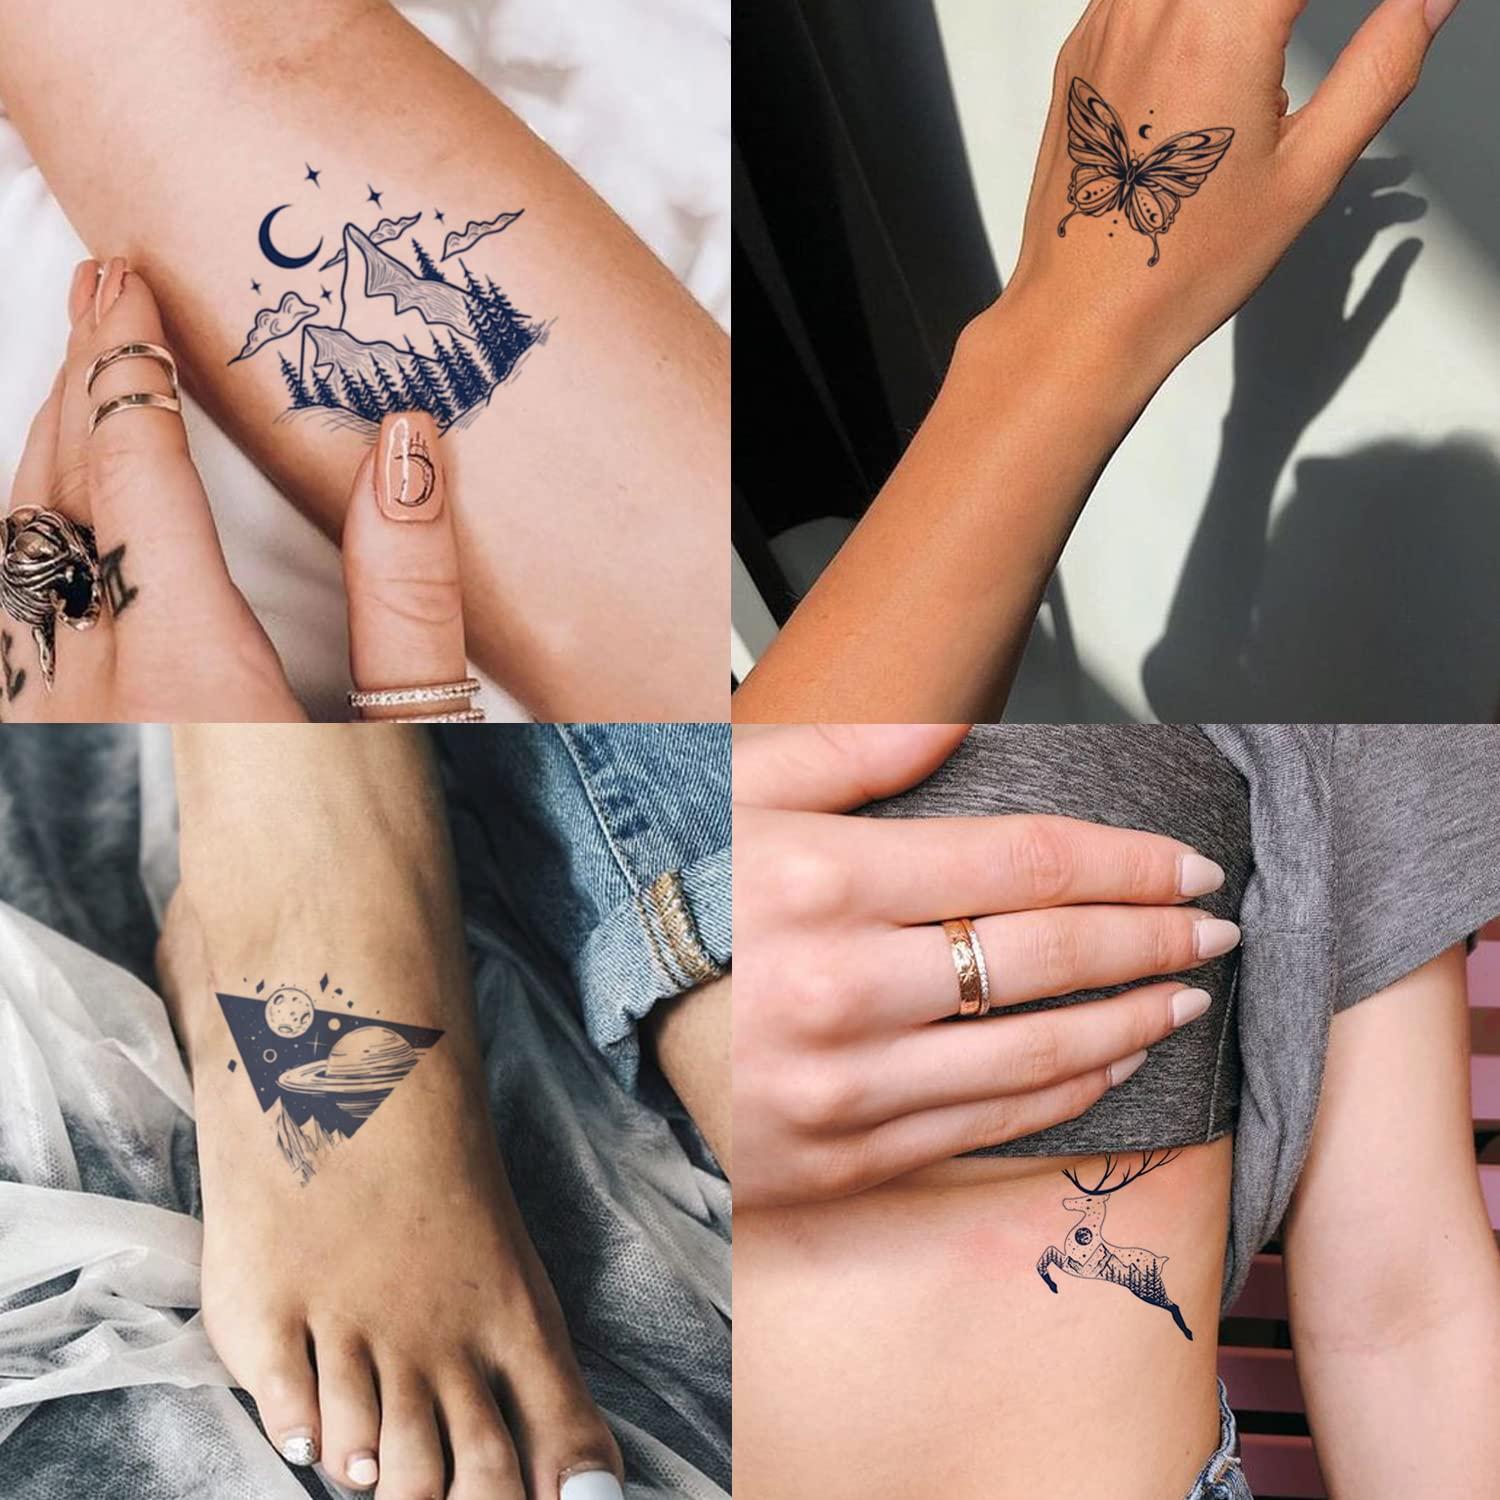 Tattoo Fading: How To Stop A Tattoo From Fading Over Time - AuthorityTattoo